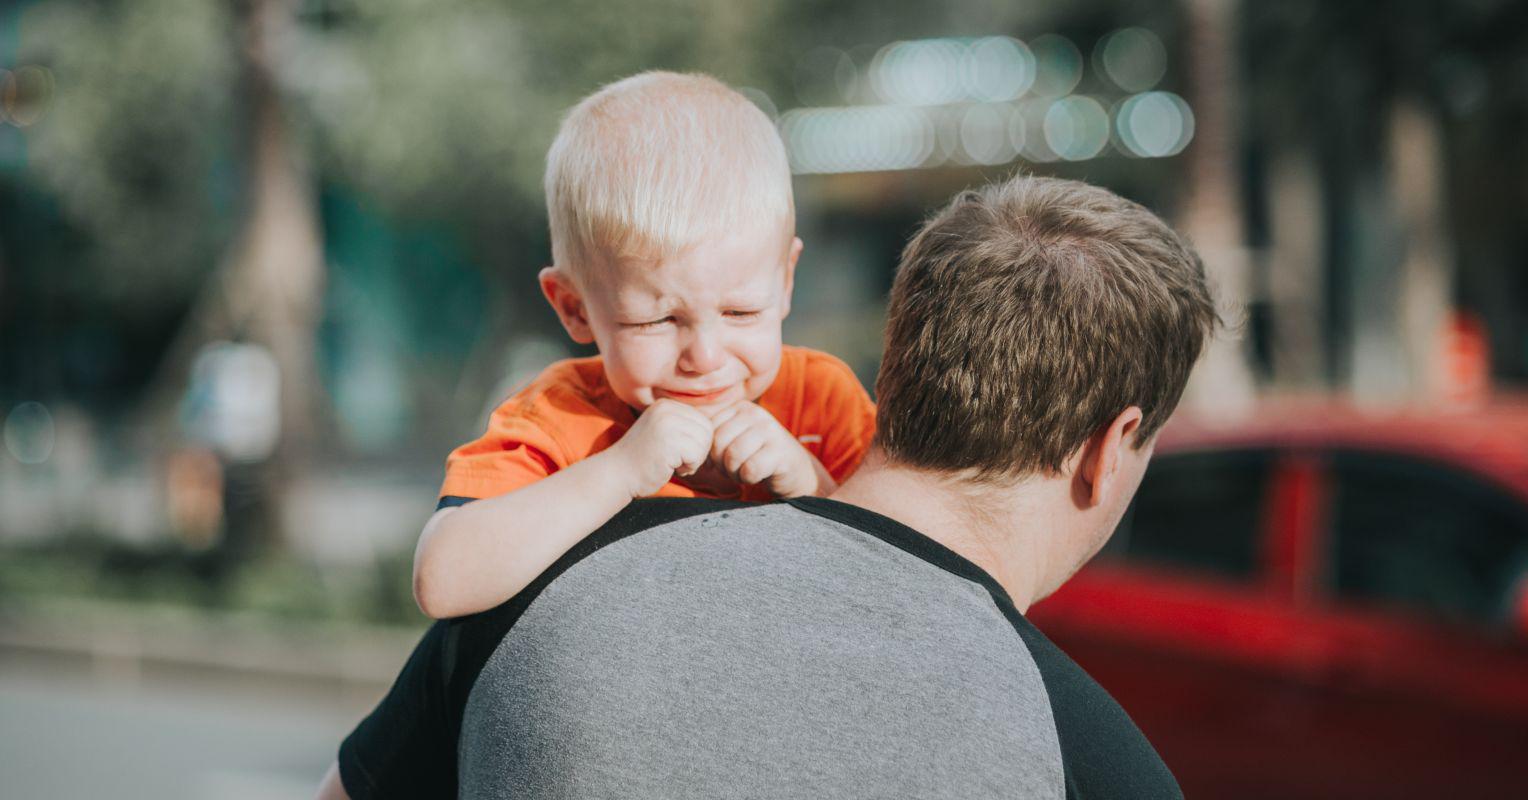 6 Surprising Findings About Temper Tantrums